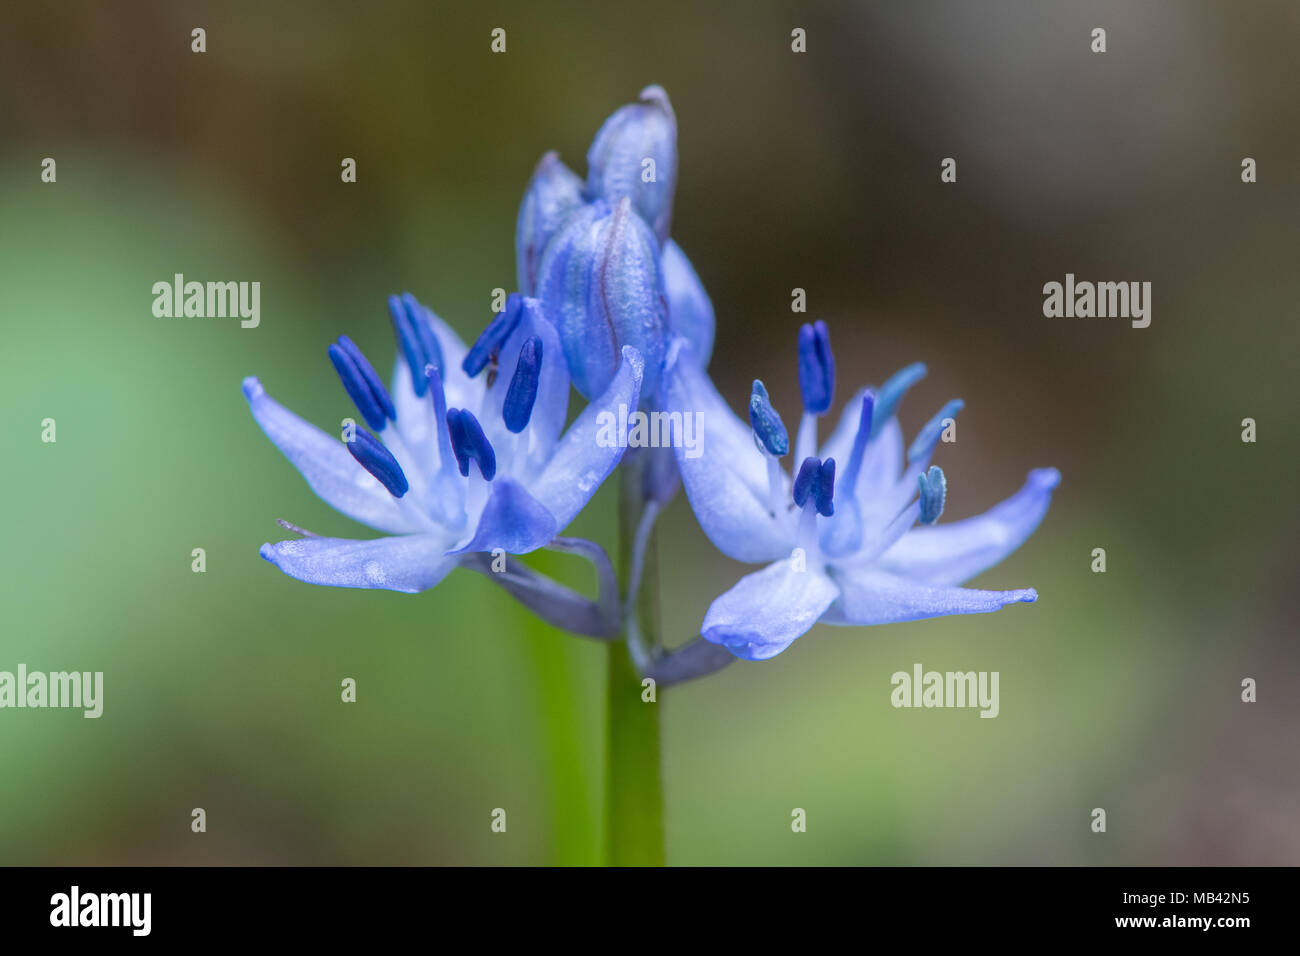 Flowers of Scilla sp. showing blue anthers. Spring-flowering bulb in the family Asparagaceae, blooming in Bath Botanical Gardens Stock Photo